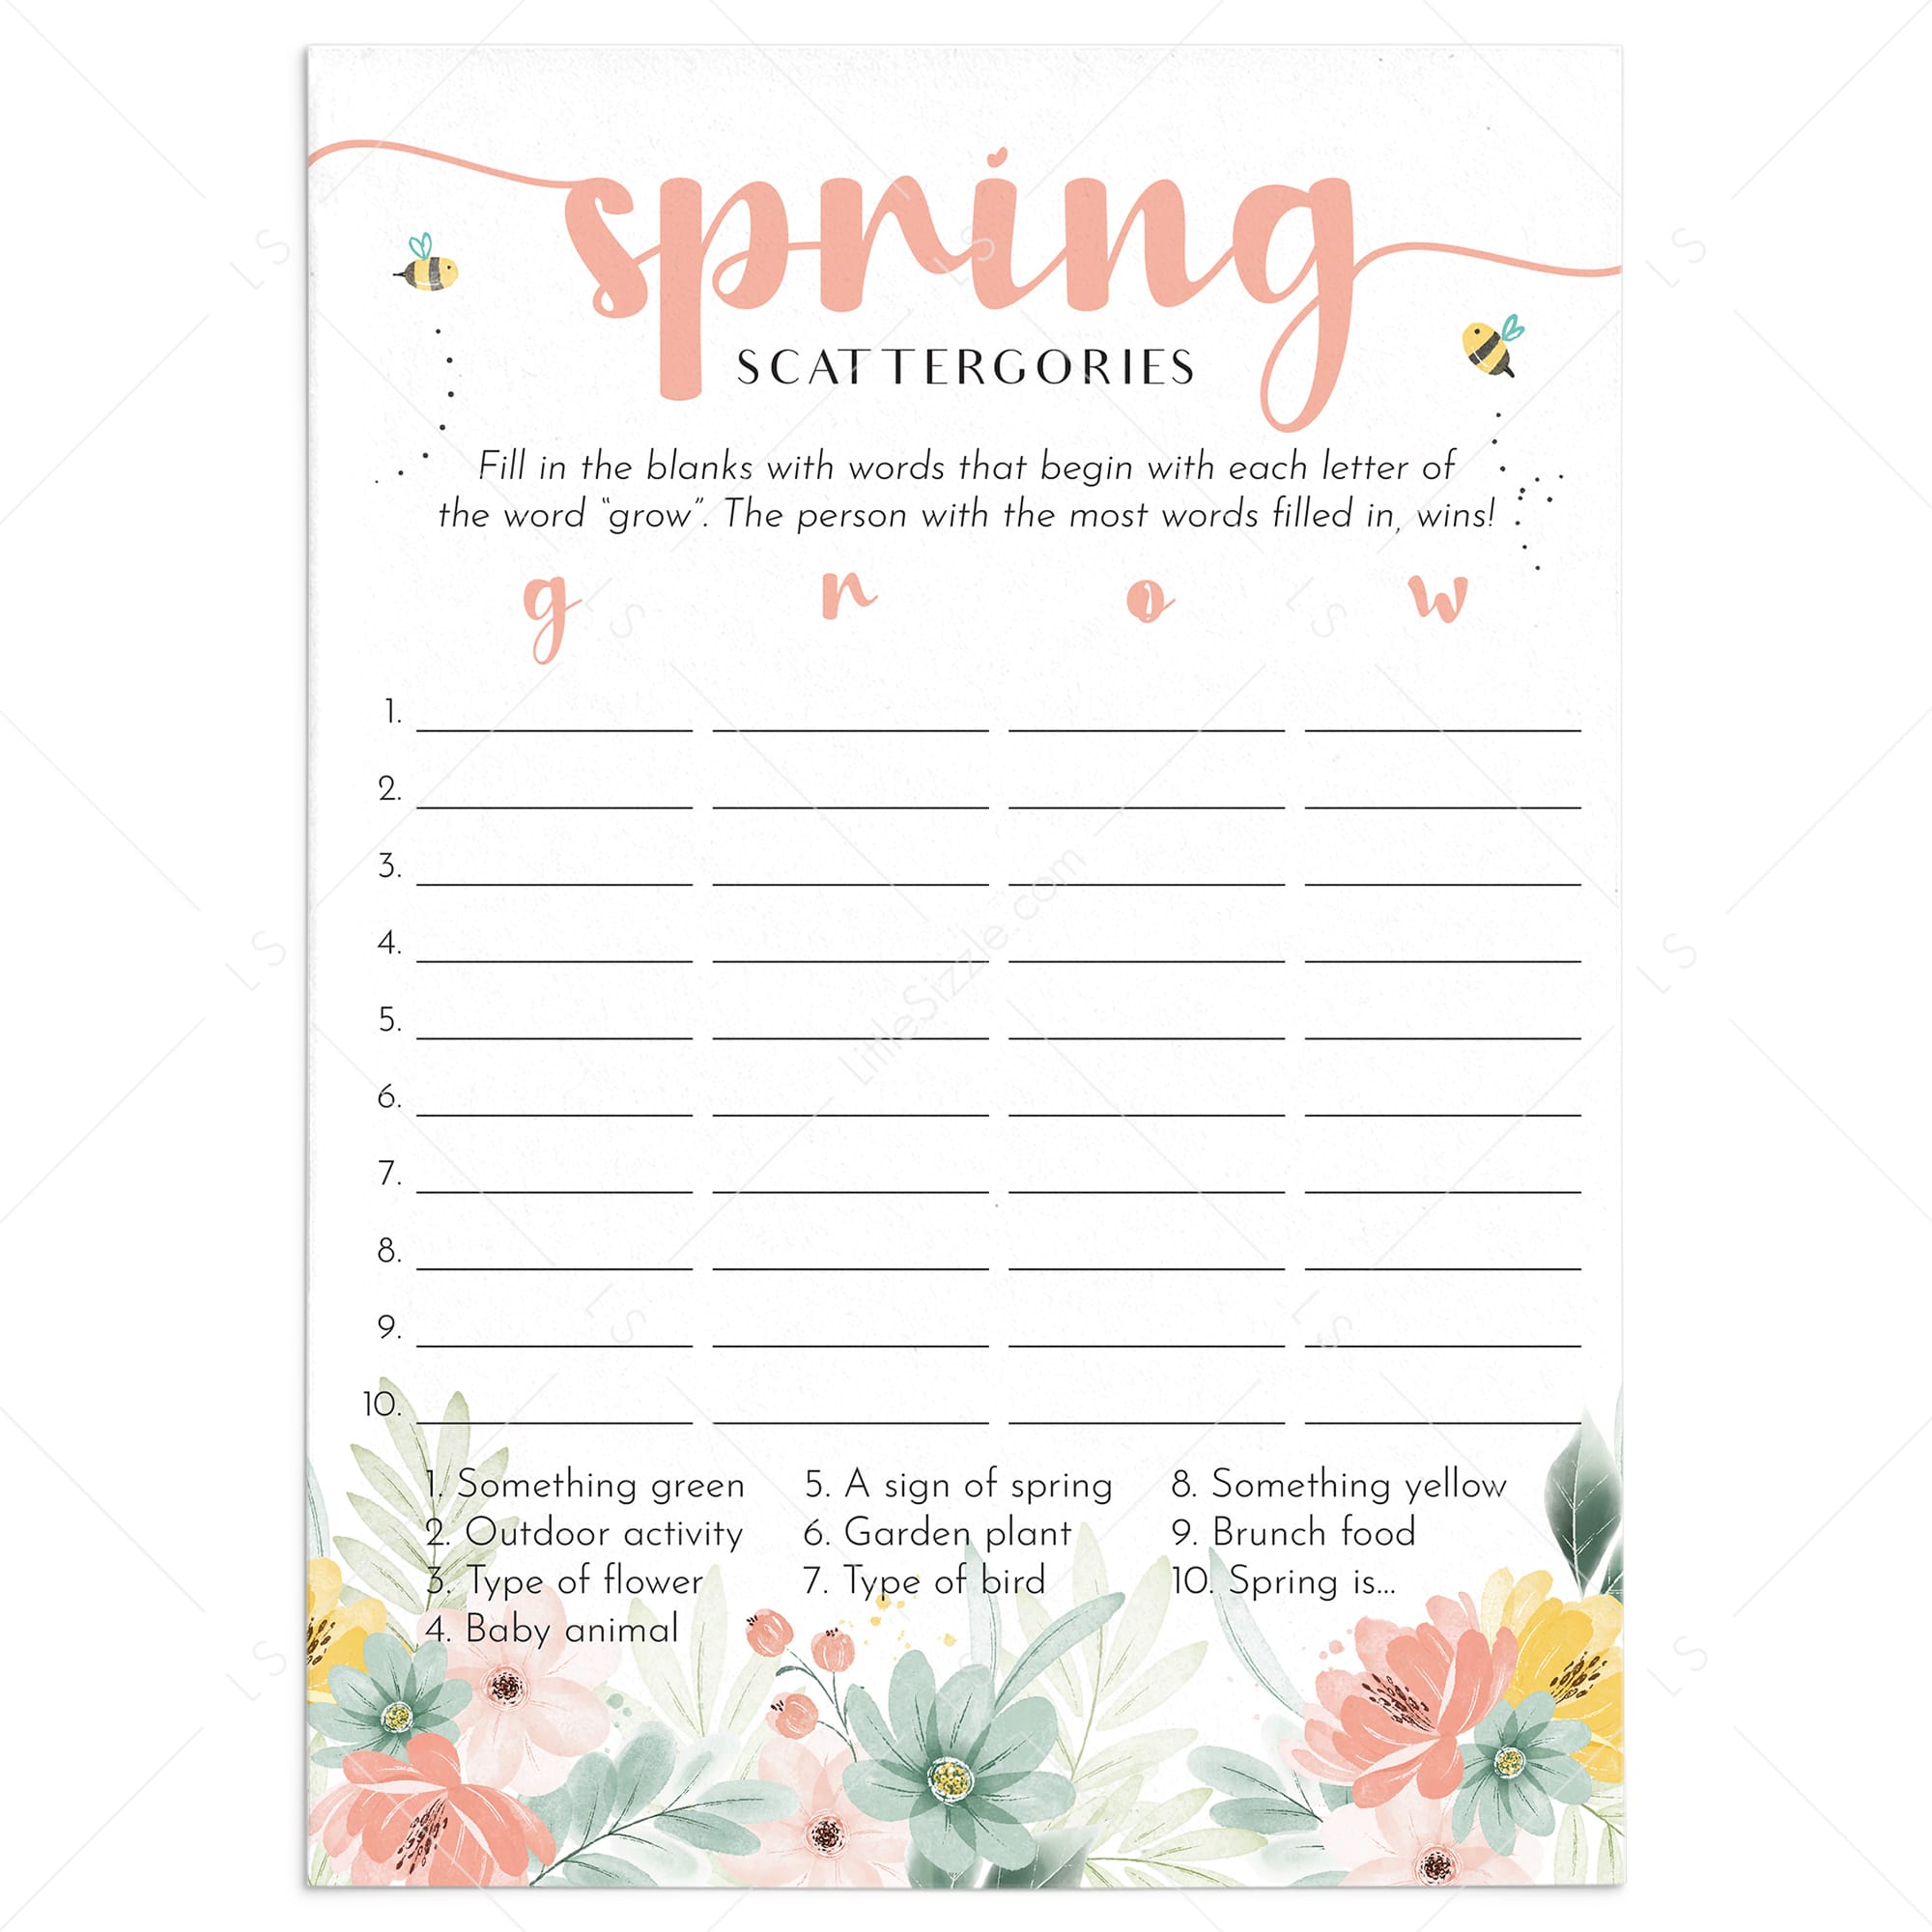 Spring Scattergories Game Printable by LittleSizzle